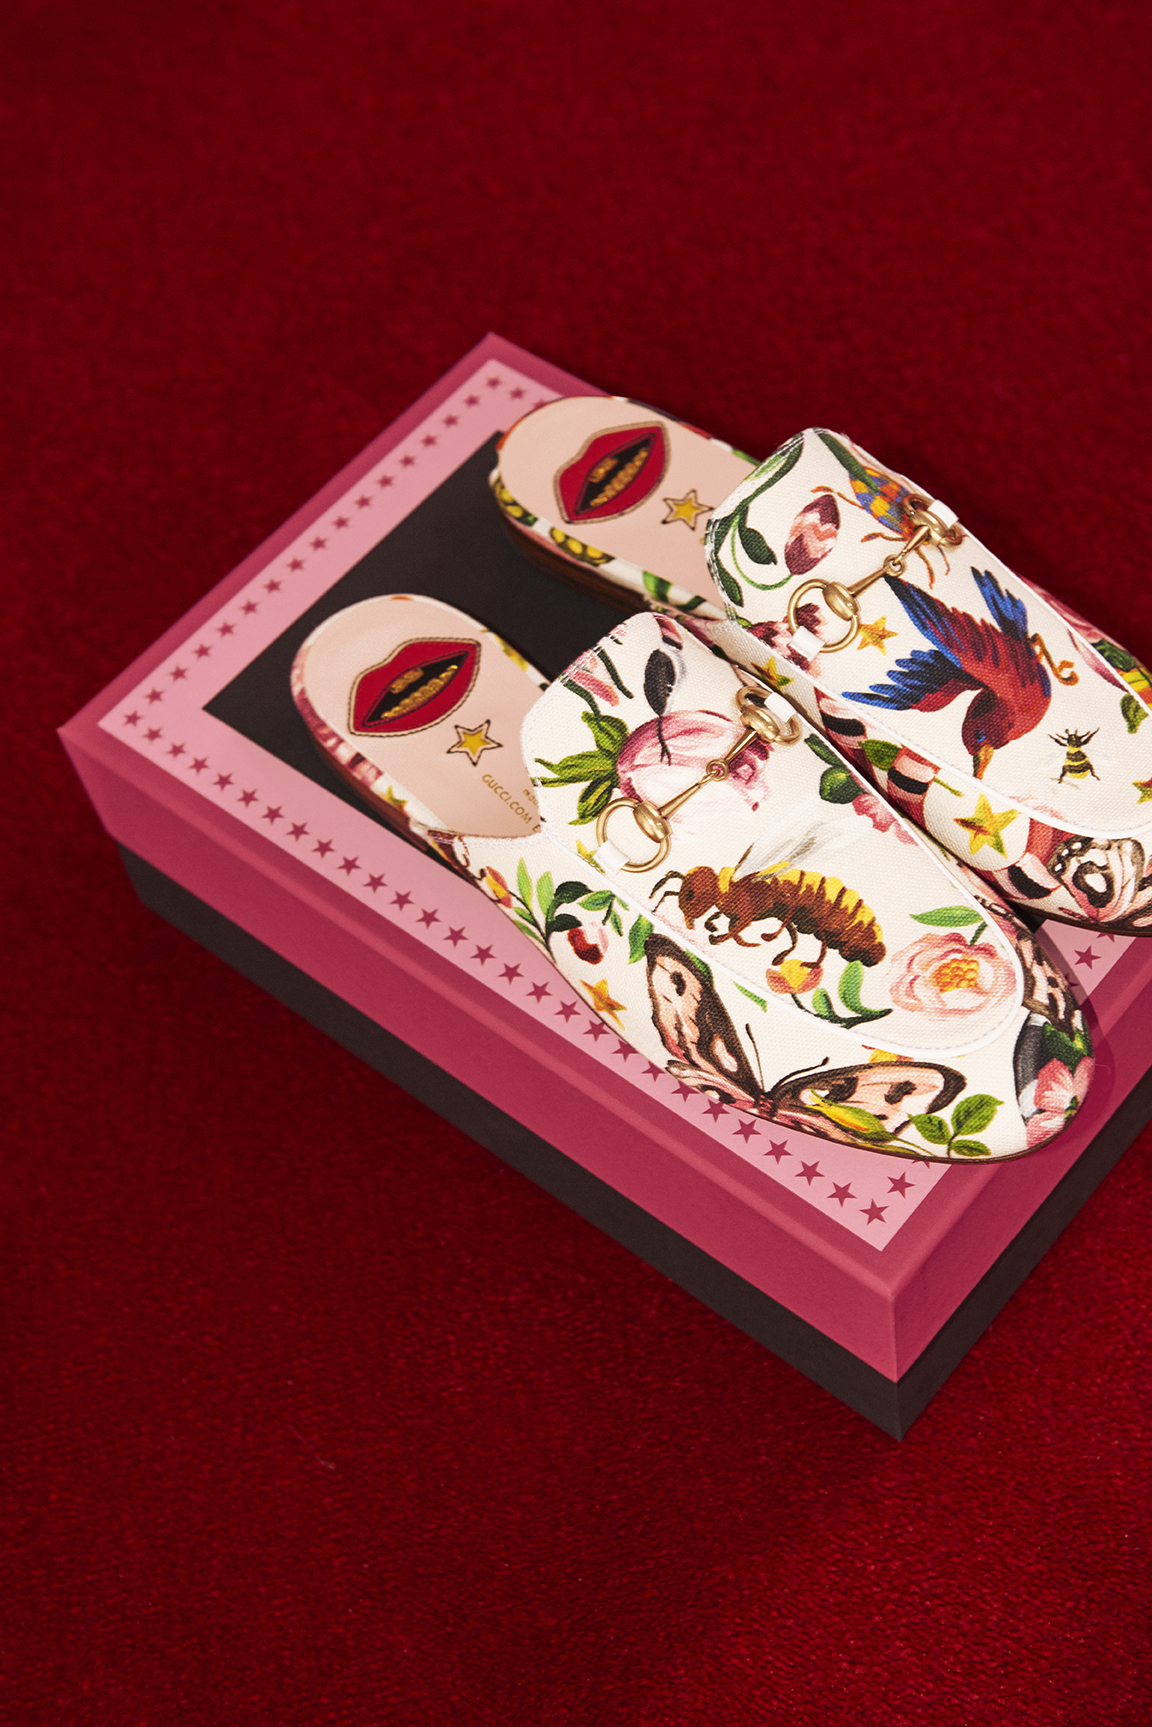 Gucci to Launch an Online Only 'Gucci Garden' Collection - Daily Front Row